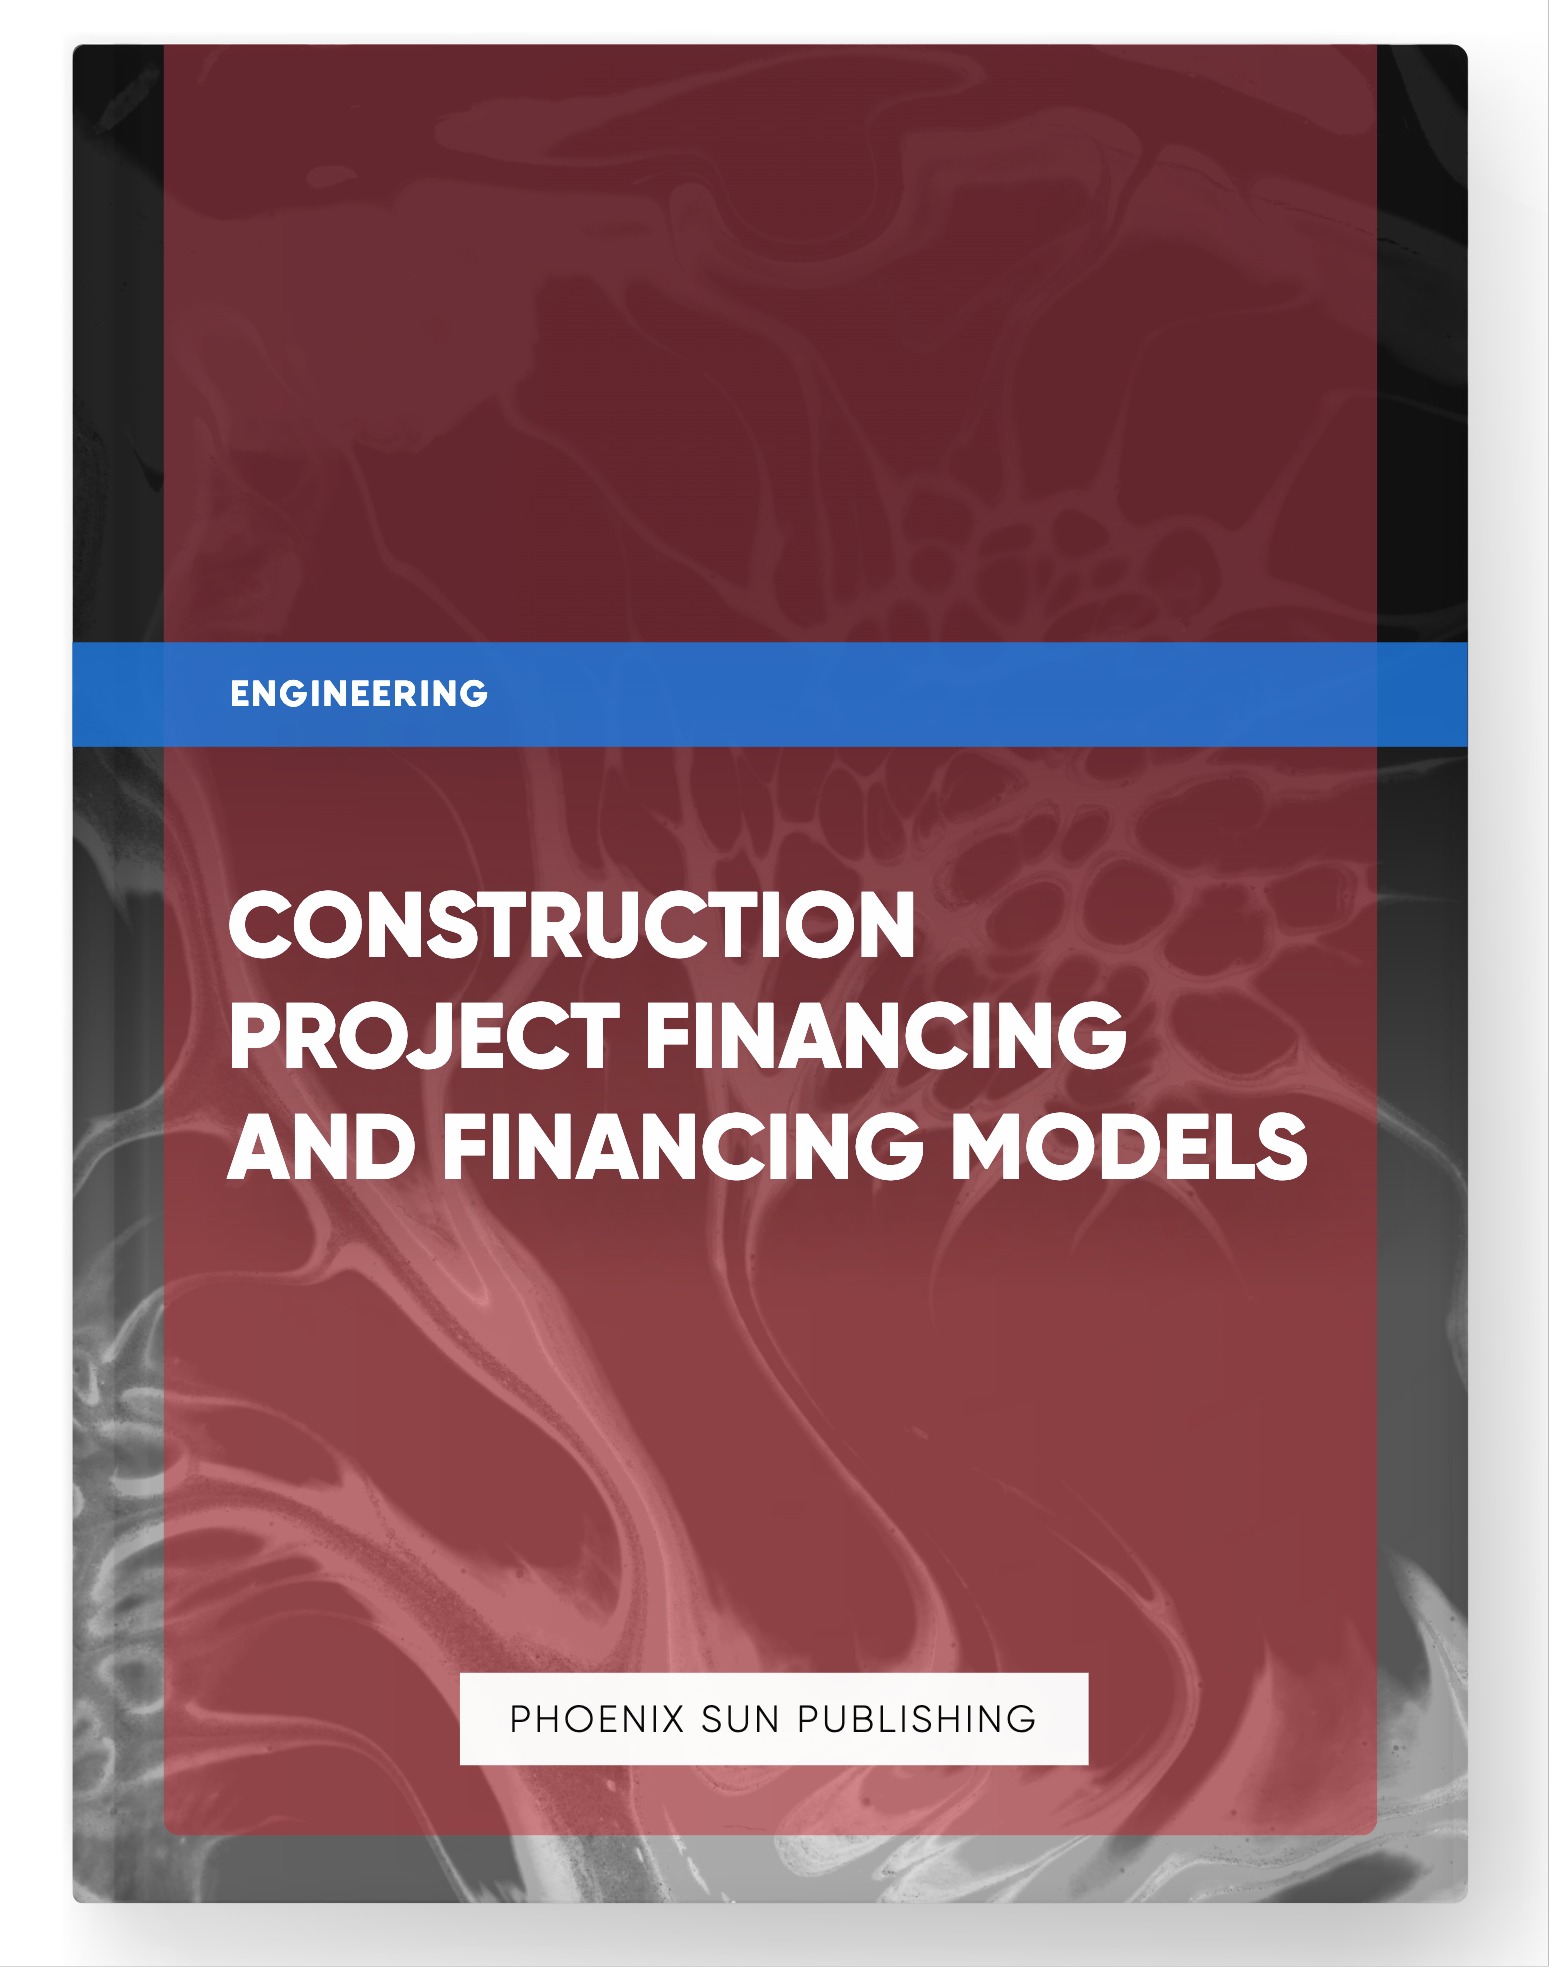 Construction Project Financing and Financing Models